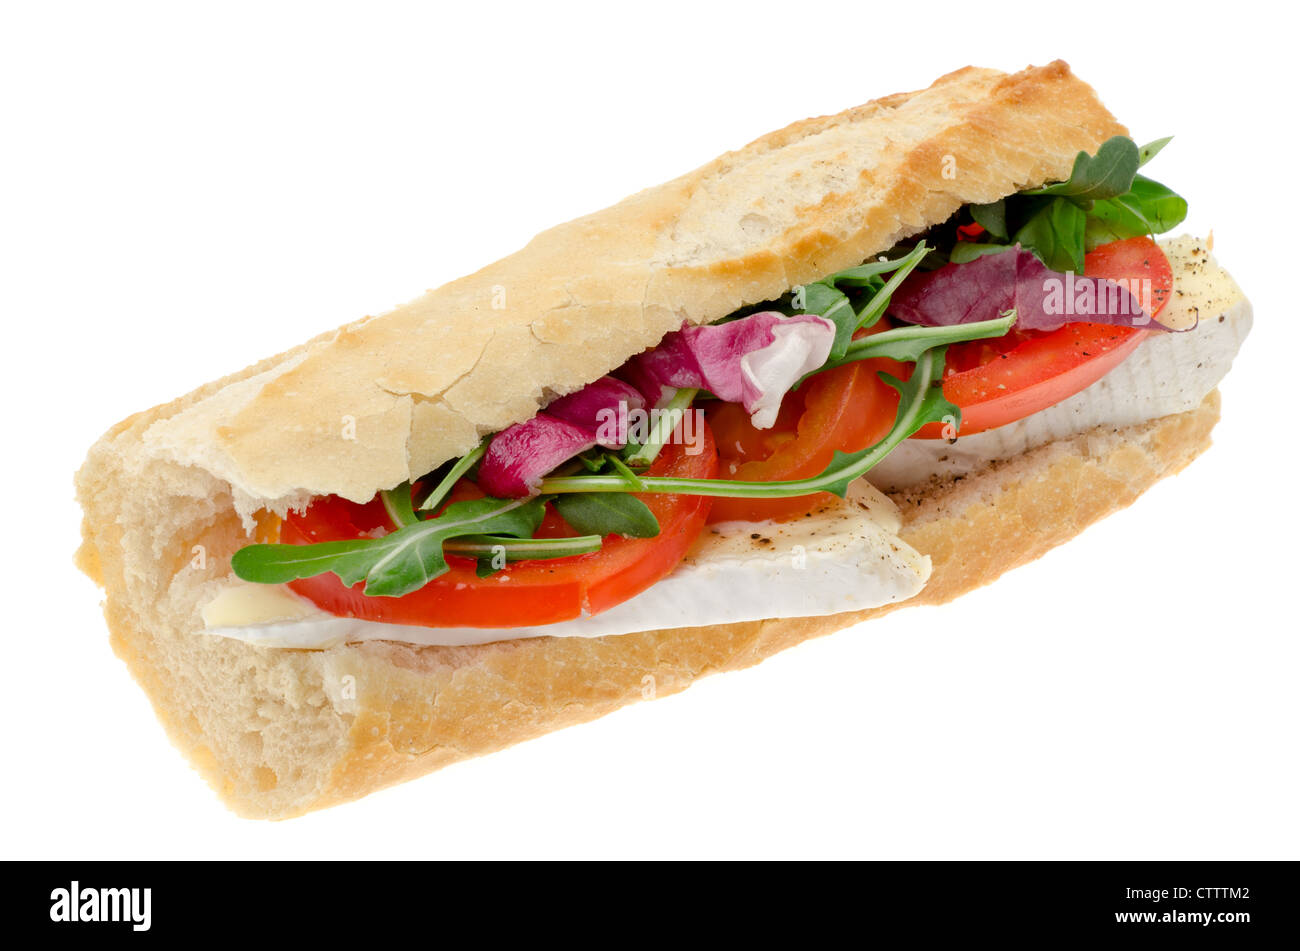 Brie cheese and salad baguette sandwich - studio shot with a white background Stock Photo